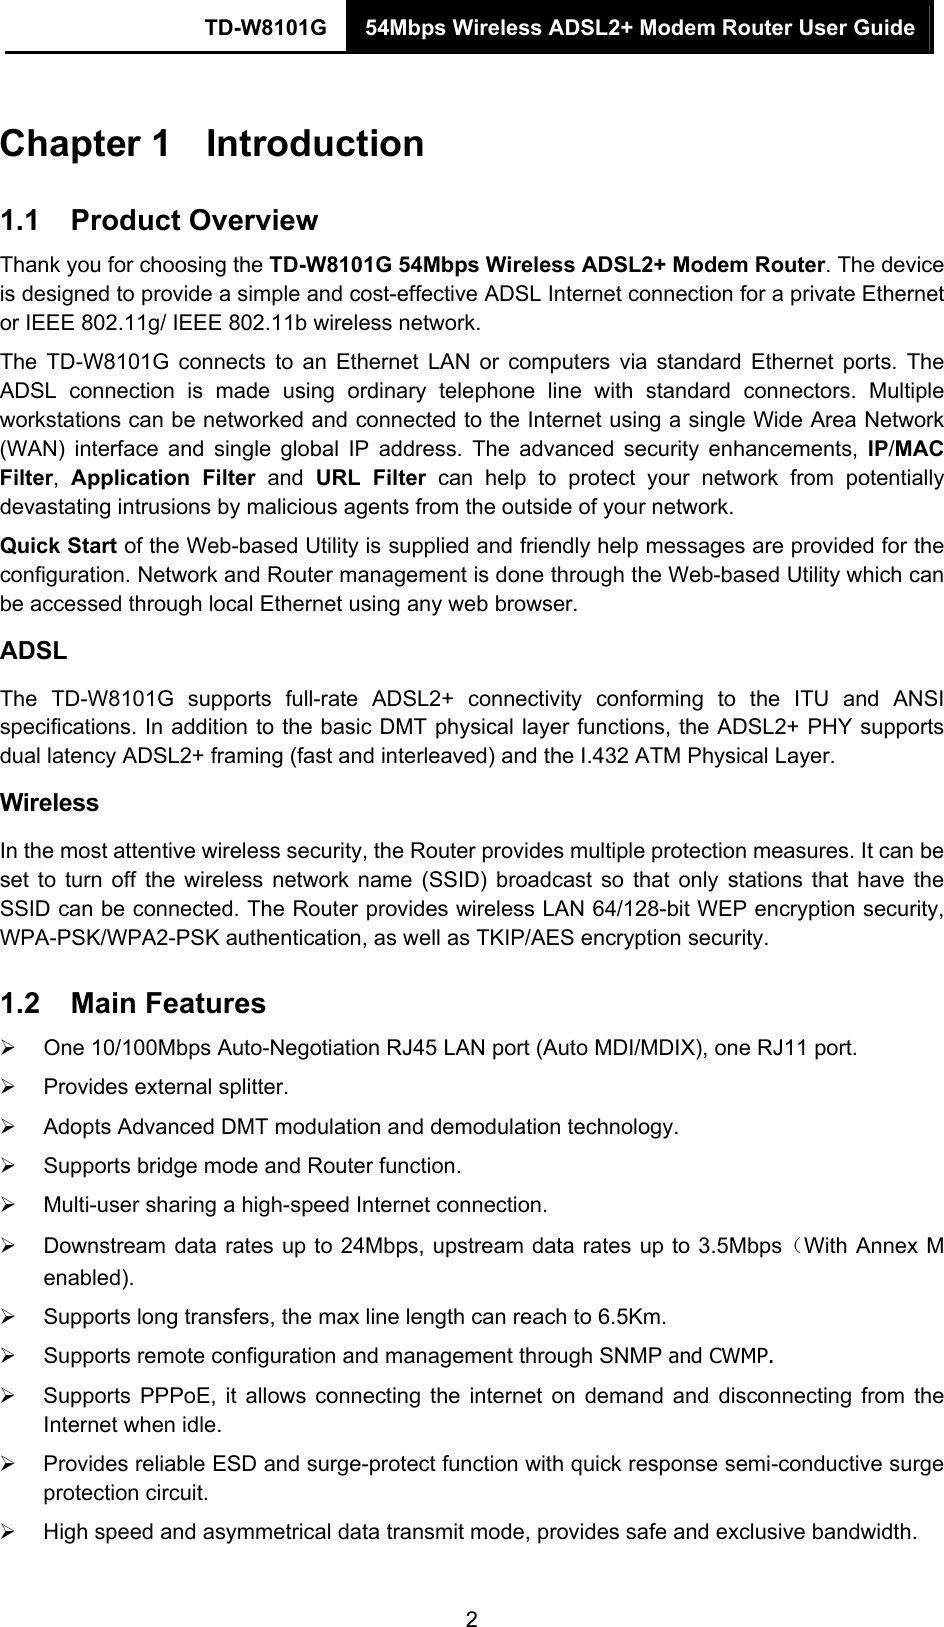 TD-W8101G  54Mbps Wireless ADSL2+ Modem Router User Guide  2Chapter 1  Introduction 1.1  Product Overview Thank you for choosing the TD-W8101G 54Mbps Wireless ADSL2+ Modem Router. The device is designed to provide a simple and cost-effective ADSL Internet connection for a private Ethernet or IEEE 802.11g/ IEEE 802.11b wireless network. The TD-W8101G connects to an Ethernet LAN or computers via standard Ethernet ports. The ADSL connection is made using ordinary telephone line with standard connectors. Multiple workstations can be networked and connected to the Internet using a single Wide Area Network (WAN) interface and single global IP address. The advanced security enhancements, IP/MAC Filter,  Application Filter and URL Filter can help to protect your network from potentially devastating intrusions by malicious agents from the outside of your network. Quick Start of the Web-based Utility is supplied and friendly help messages are provided for the configuration. Network and Router management is done through the Web-based Utility which can be accessed through local Ethernet using any web browser. ADSL The TD-W8101G supports full-rate ADSL2+ connectivity conforming to the ITU and ANSI specifications. In addition to the basic DMT physical layer functions, the ADSL2+ PHY supports dual latency ADSL2+ framing (fast and interleaved) and the I.432 ATM Physical Layer. Wireless In the most attentive wireless security, the Router provides multiple protection measures. It can be set to turn off the wireless network name (SSID) broadcast so that only stations that have the SSID can be connected. The Router provides wireless LAN 64/128-bit WEP encryption security, WPA-PSK/WPA2-PSK authentication, as well as TKIP/AES encryption security. 1.2  Main Features ¾  One 10/100Mbps Auto-Negotiation RJ45 LAN port (Auto MDI/MDIX), one RJ11 port. ¾  Provides external splitter. ¾  Adopts Advanced DMT modulation and demodulation technology. ¾  Supports bridge mode and Router function. ¾  Multi-user sharing a high-speed Internet connection. ¾  Downstream data rates up to 24Mbps, upstream data rates up to 3.5Mbps（With Annex M enabled). ¾  Supports long transfers, the max line length can reach to 6.5Km. ¾  Supports remote configuration and management through SNMP and CWMP. ¾  Supports PPPoE, it allows connecting the internet on demand and disconnecting from the Internet when idle. ¾  Provides reliable ESD and surge-protect function with quick response semi-conductive surge protection circuit. ¾  High speed and asymmetrical data transmit mode, provides safe and exclusive bandwidth. 